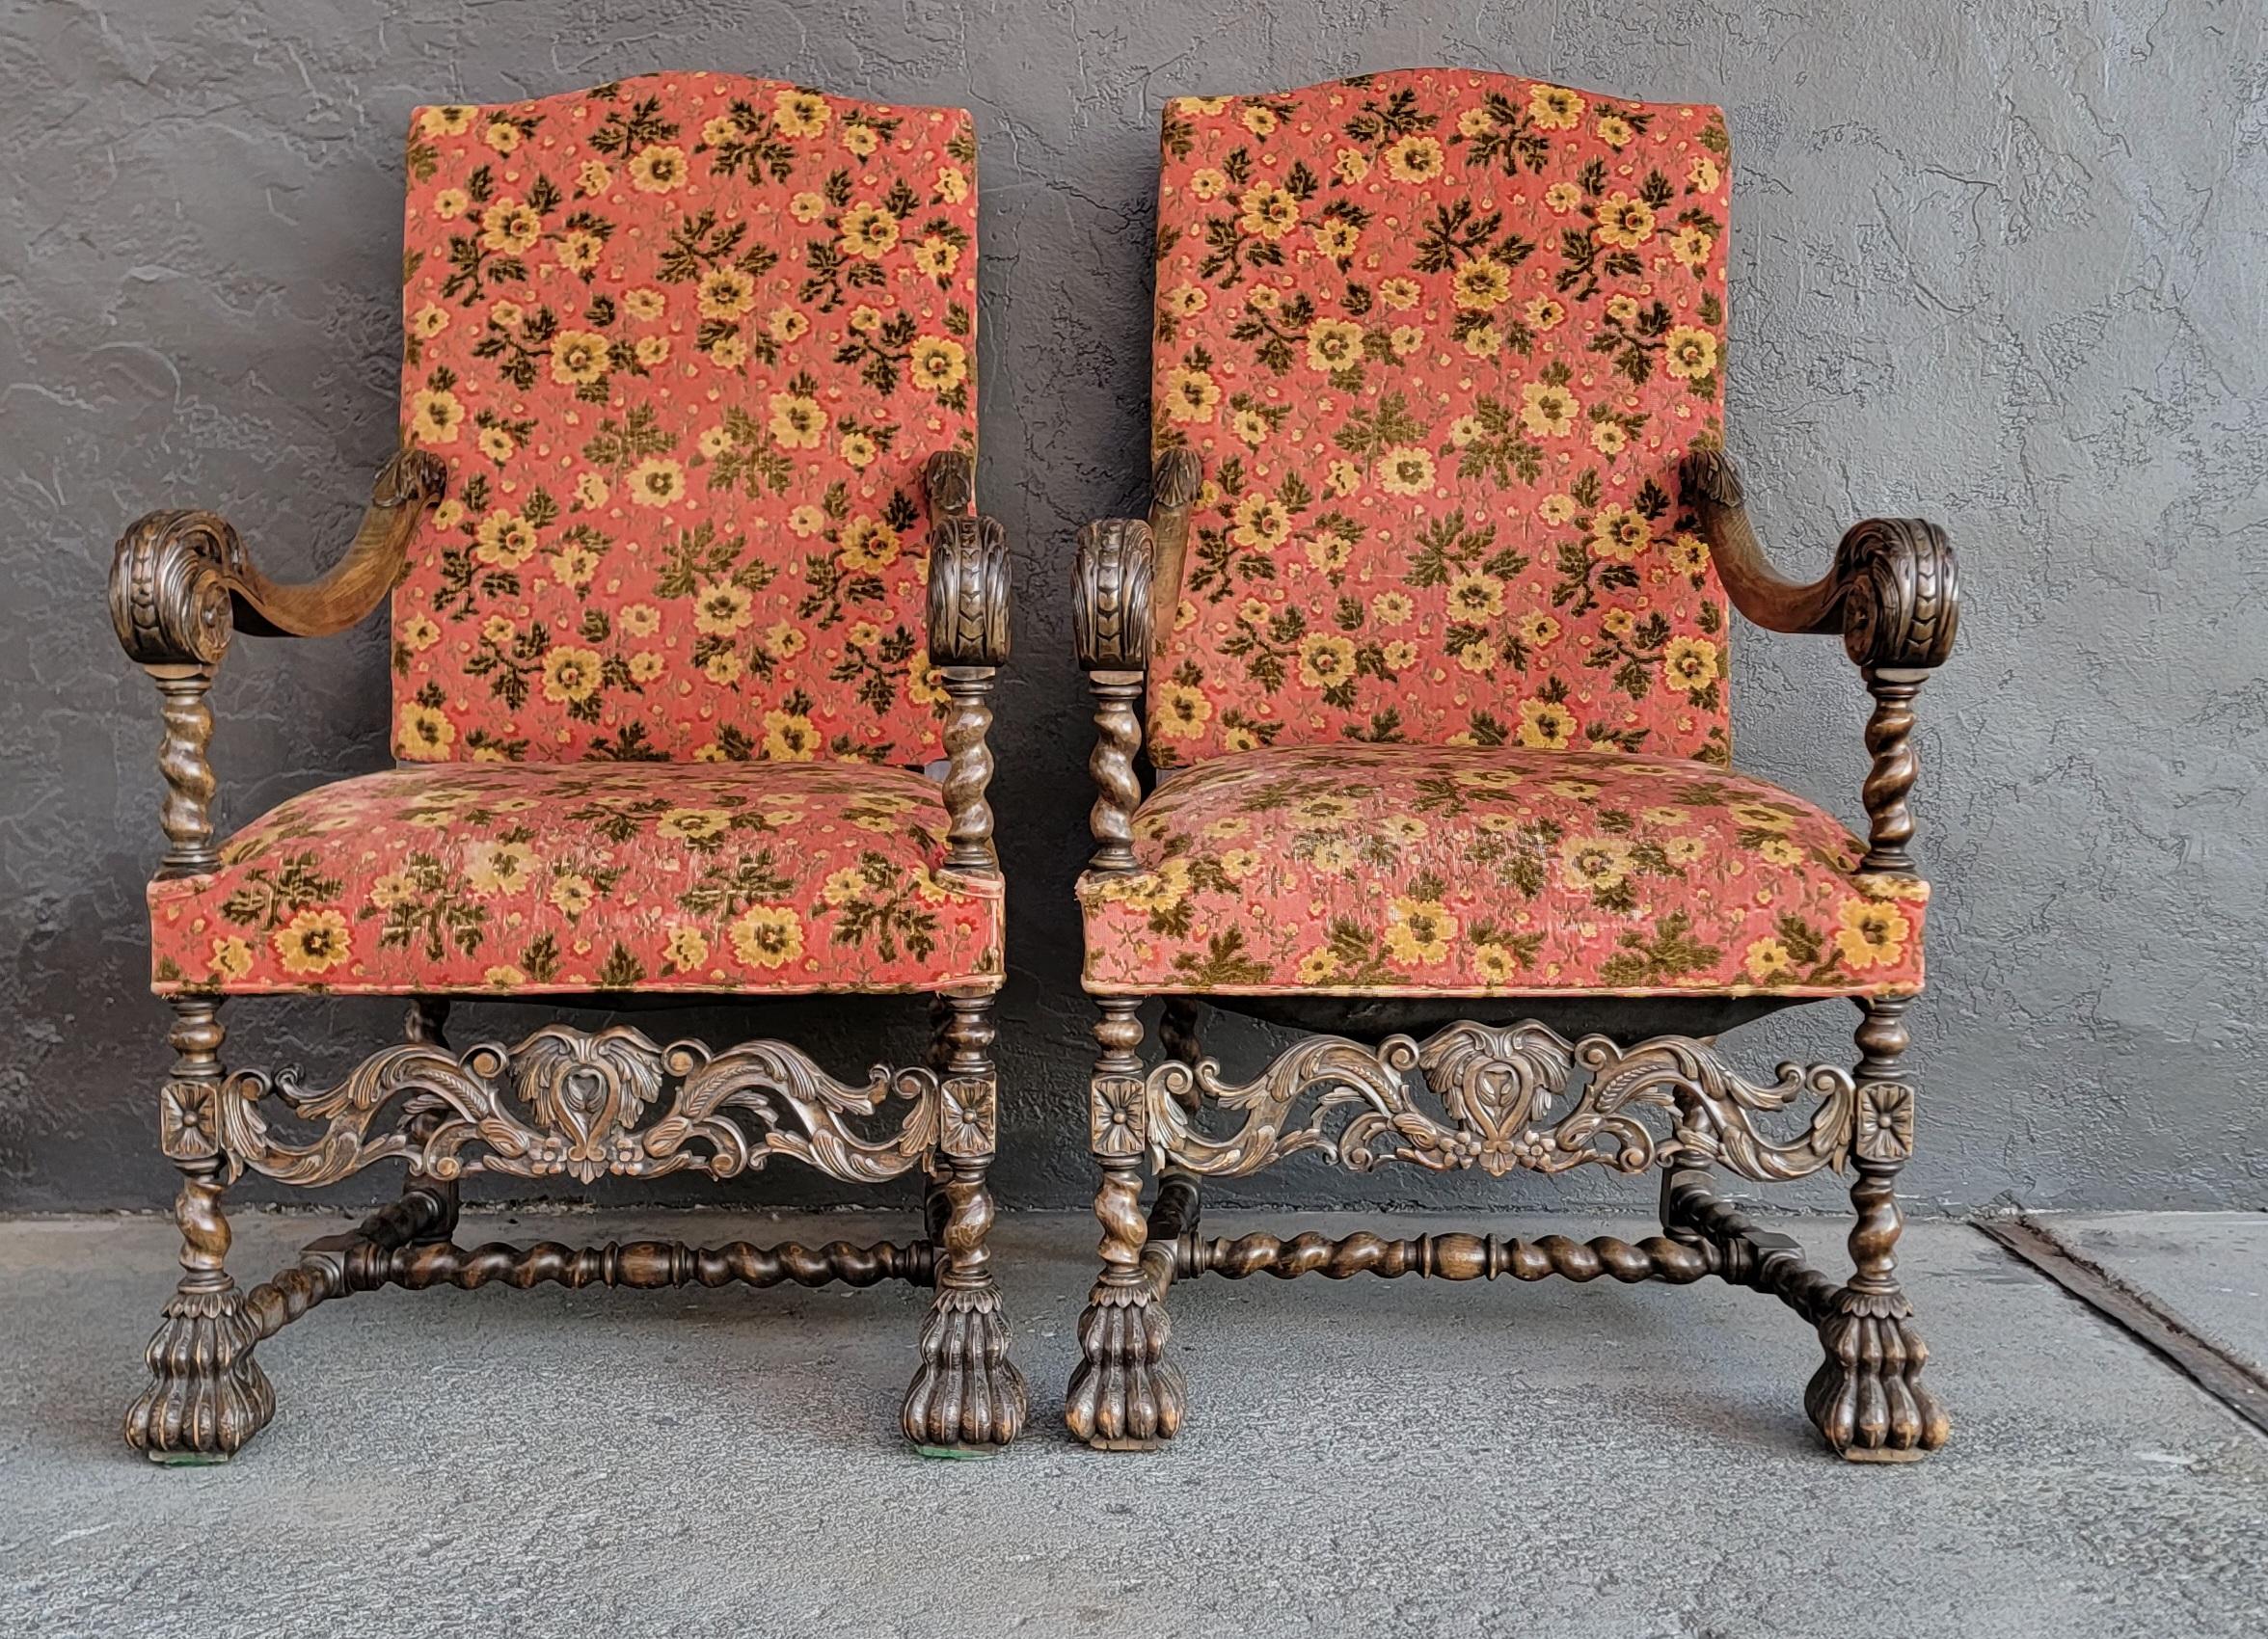 American Gothic Revival Throne Chairs a Pair 1920's For Sale